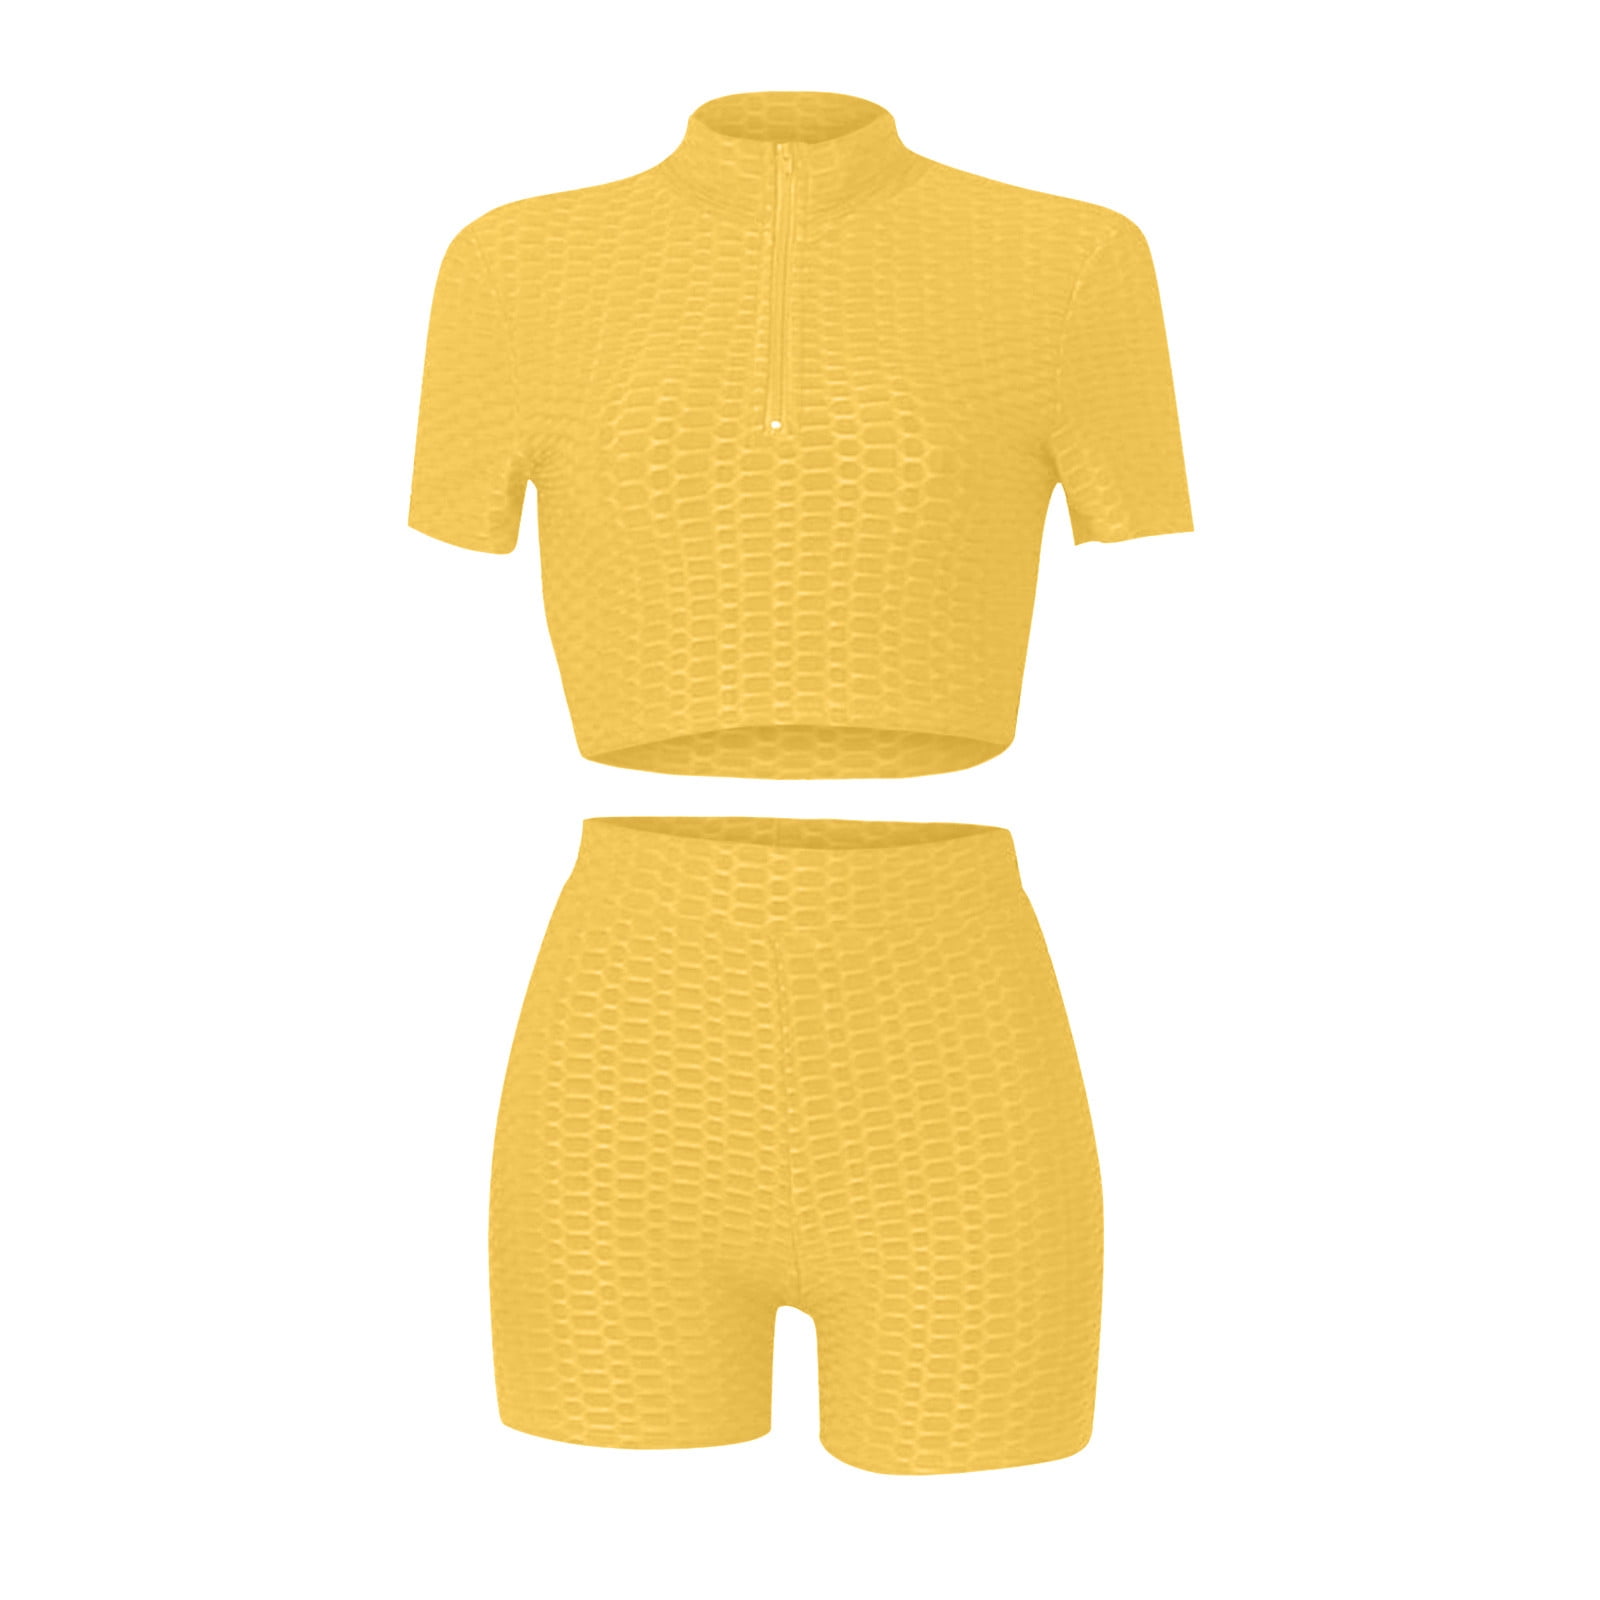 REORIAFEE Cute Outfits for Women 70s Outfits Women's Sportswear 2 Piece Set  Workout Short Sleeve Exercise Zipper Yoga Clothes Yellow L 